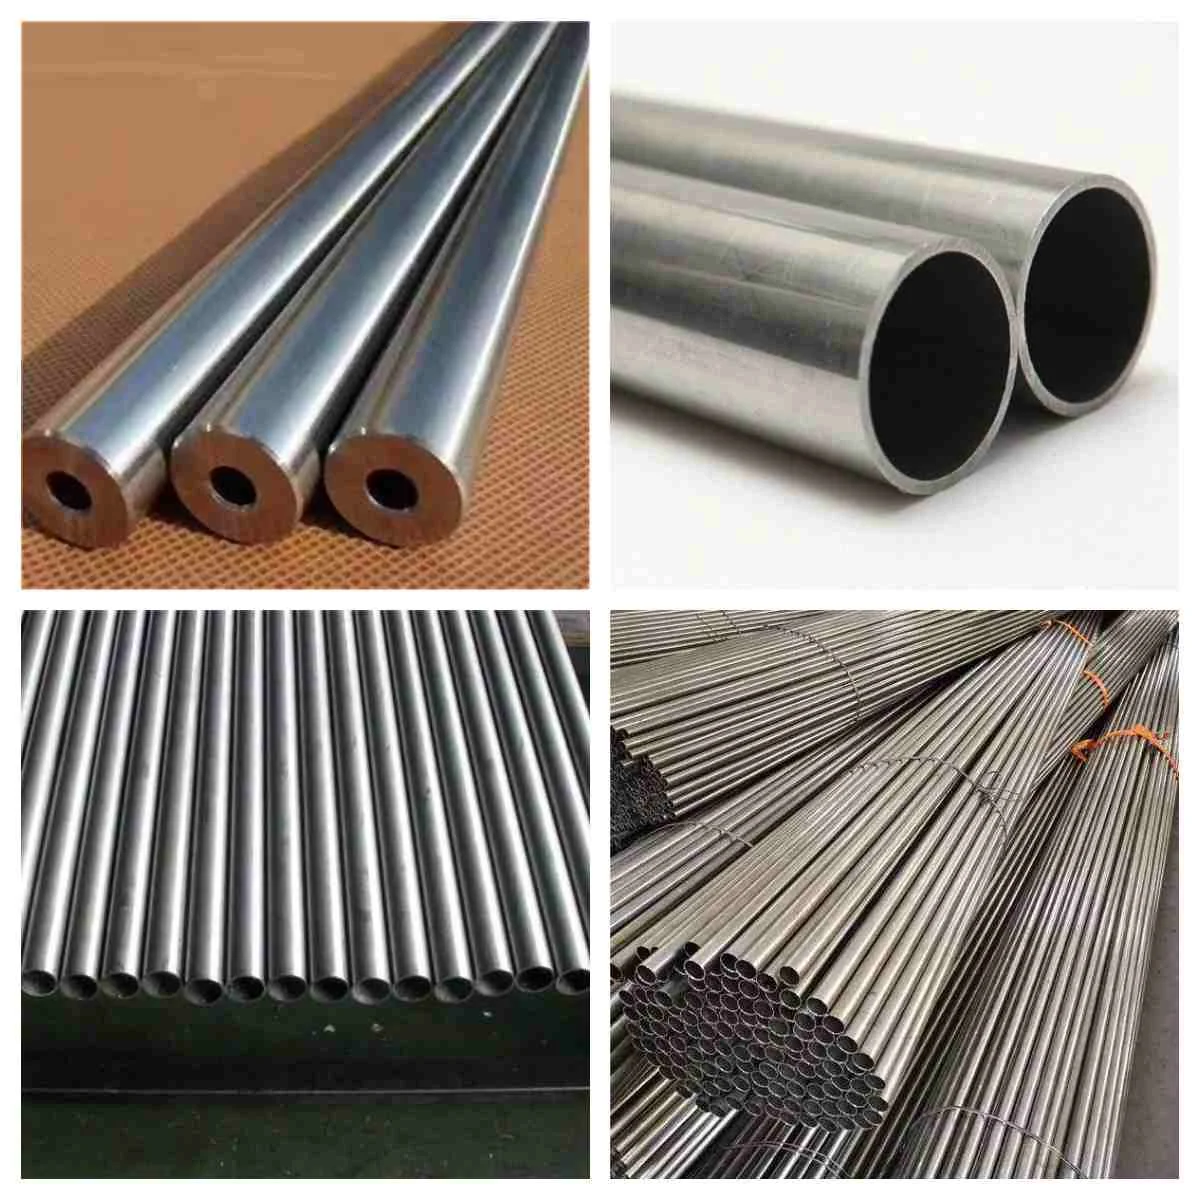 Precision seamless steel pipes